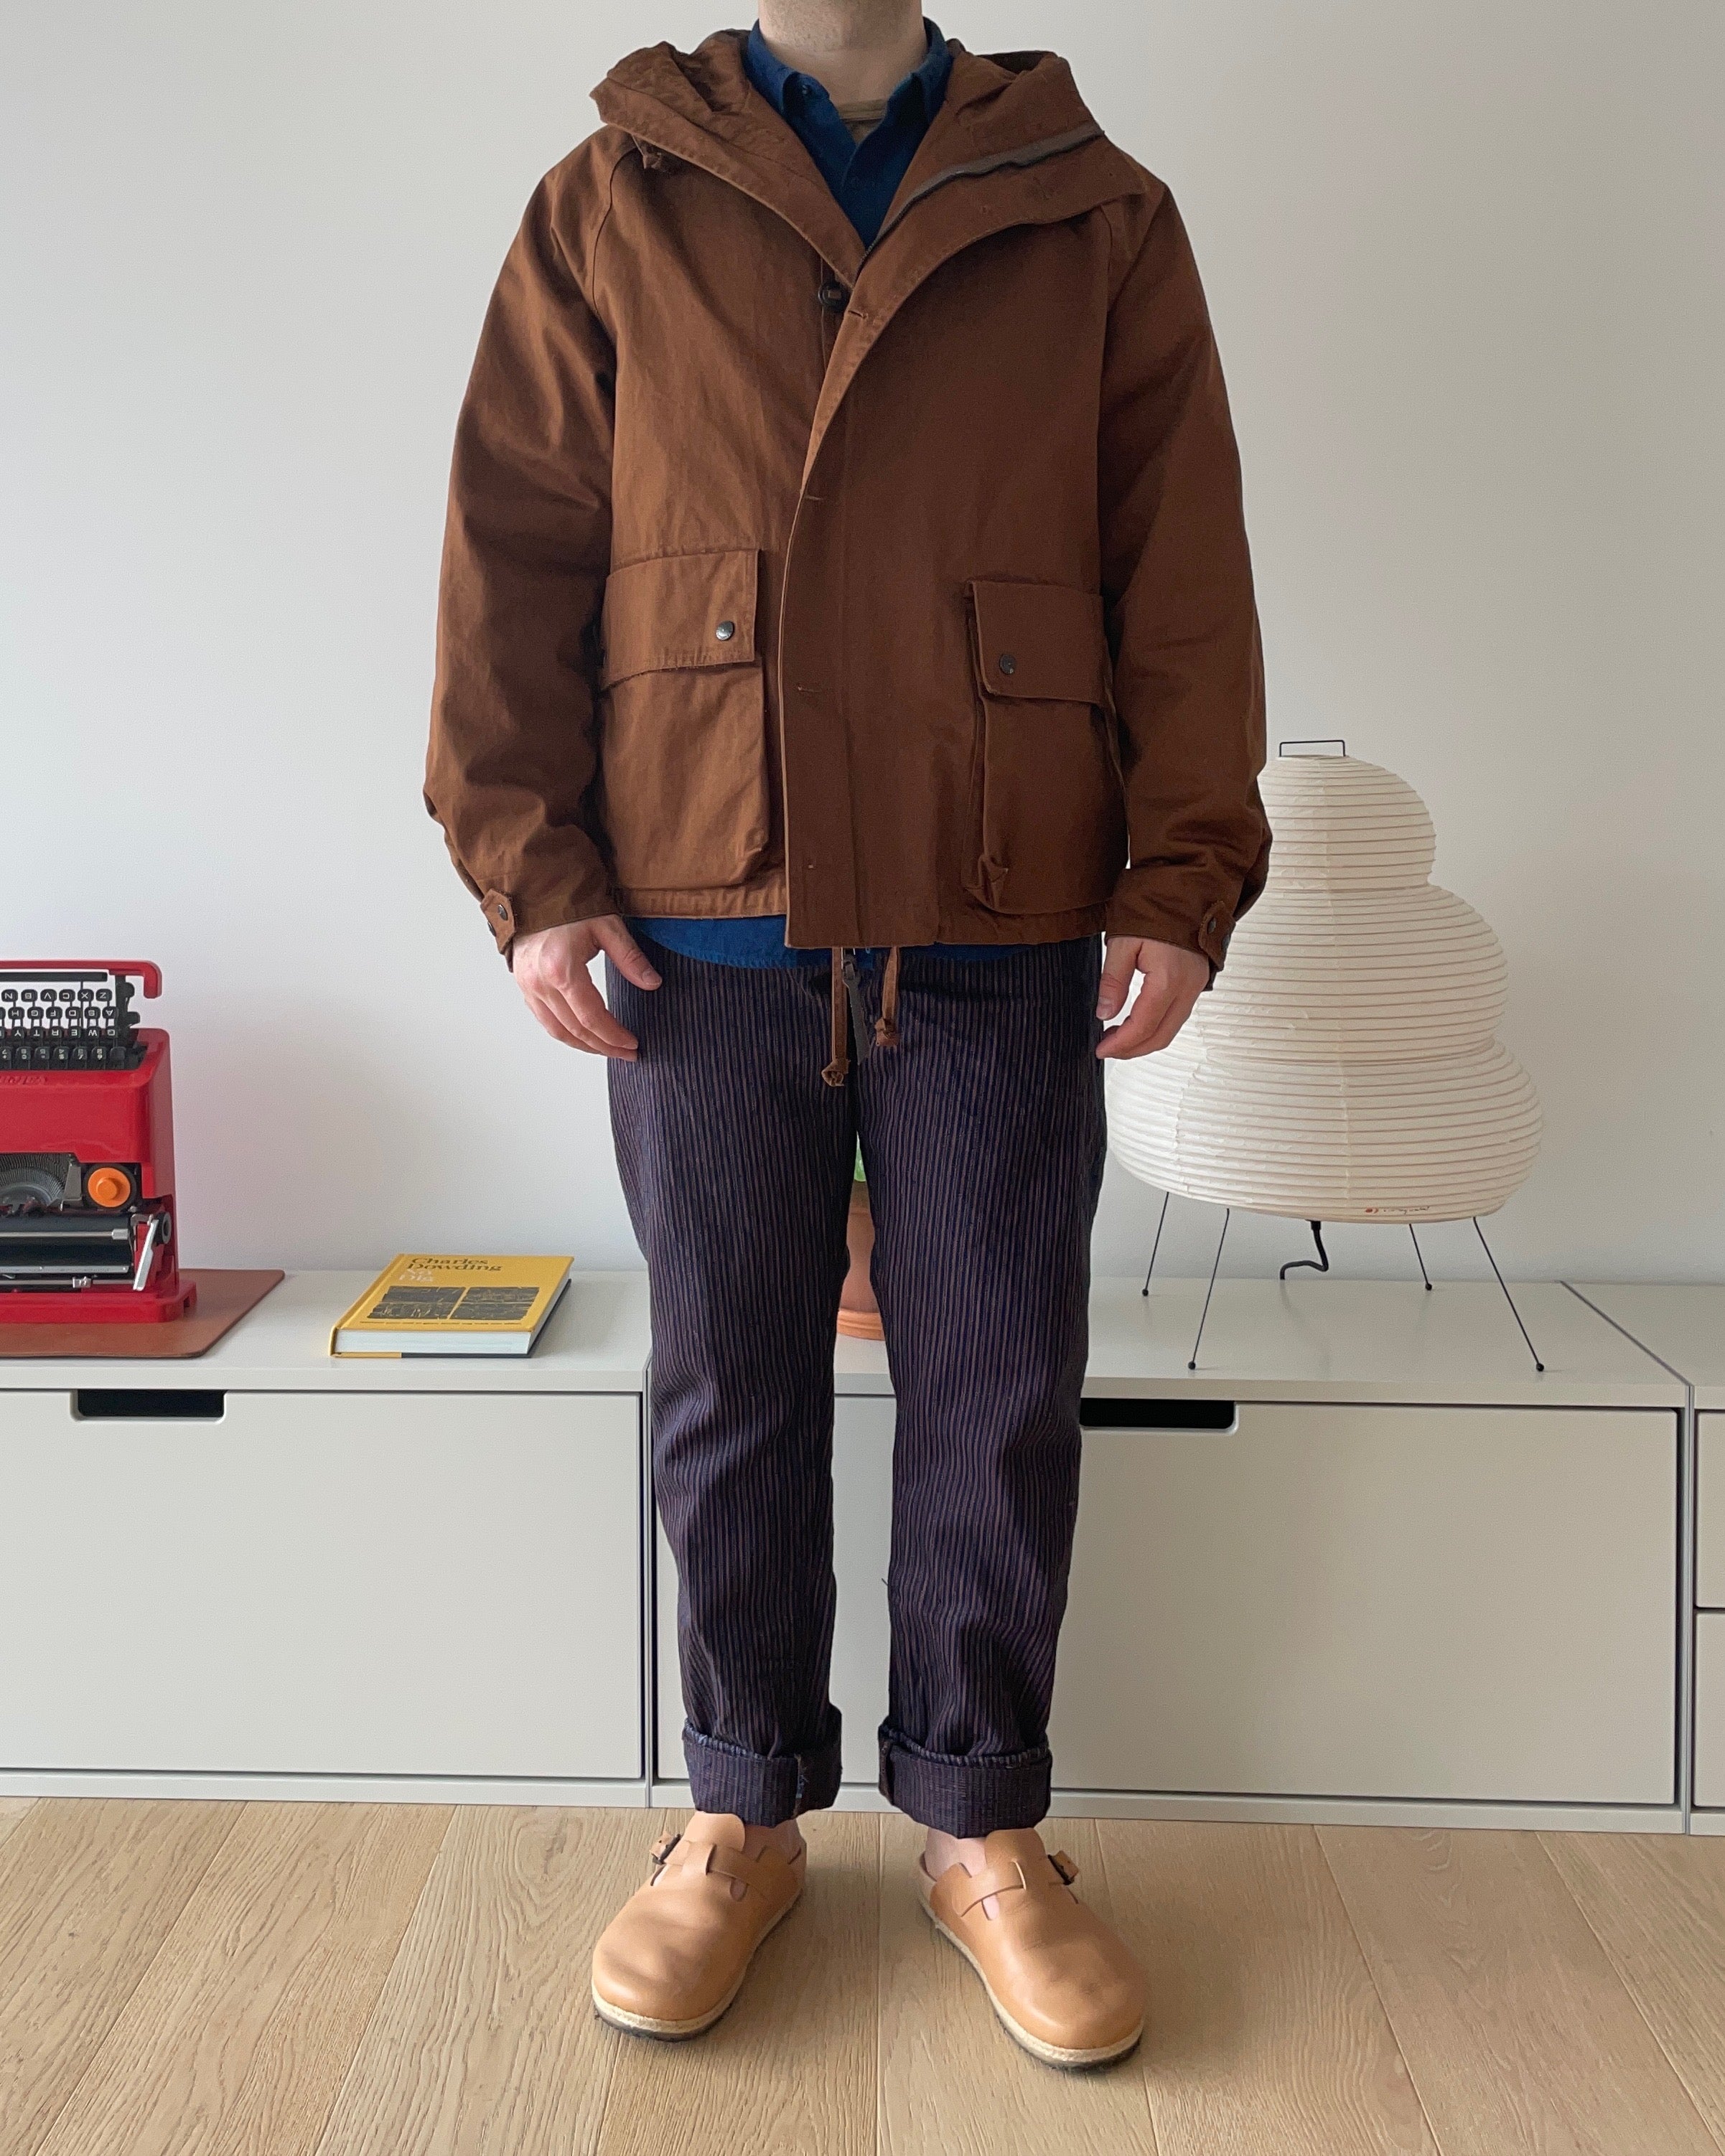 Backsatin - Design Store Weather TEMPO – Tempo Foul EASTLOGUE in Parka Brown